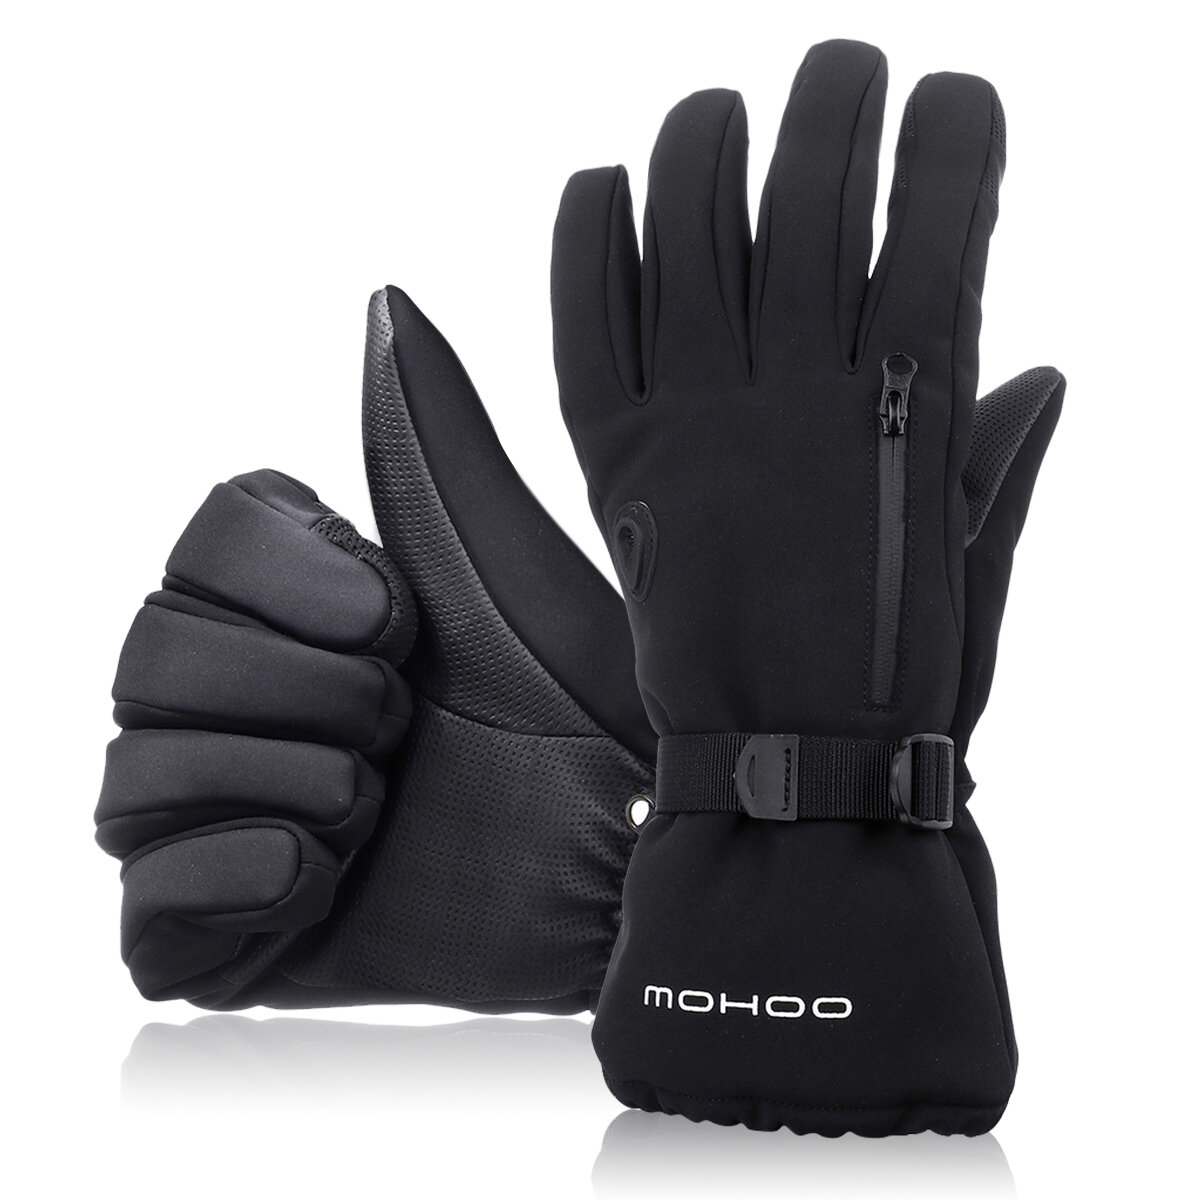 MOHOO Skiing Winter Gloves Touch Screen Motorcycle Bicycle Running Non-slip Waterproof Windproof Spo